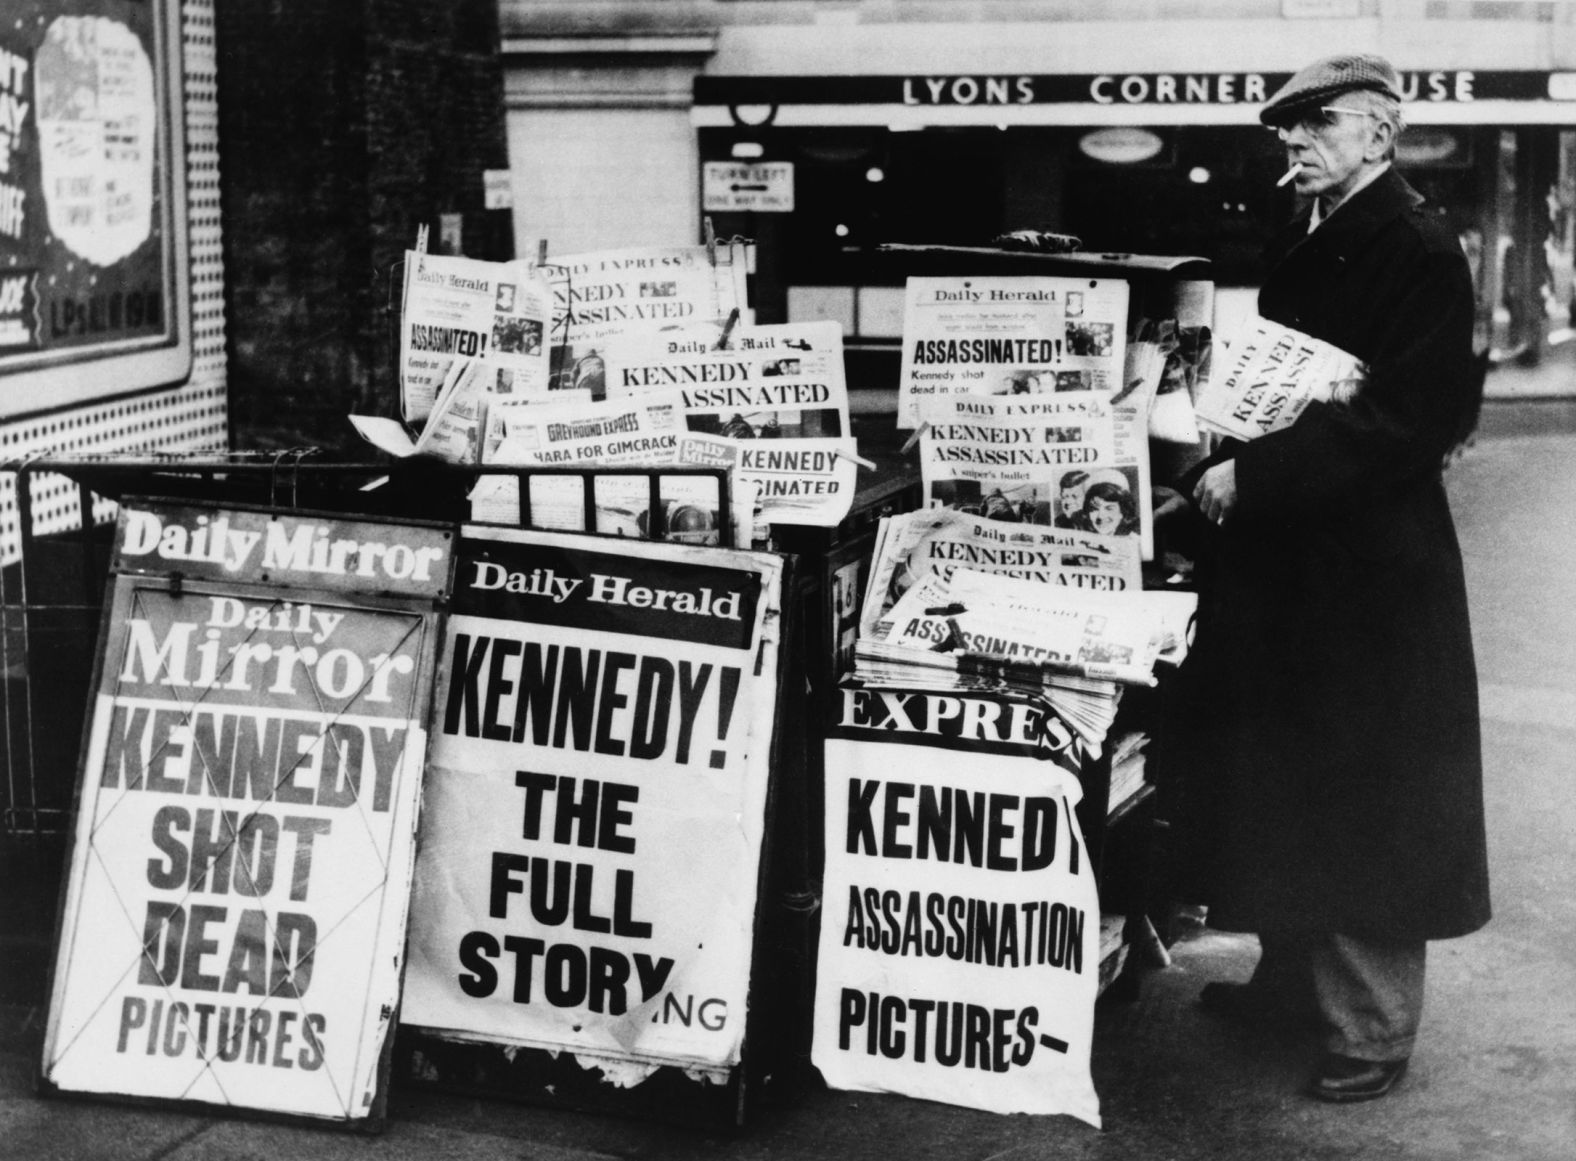 A newspaper stand in London's Trafalgar Square features headlines about Kennedy's death the day after the assassination.